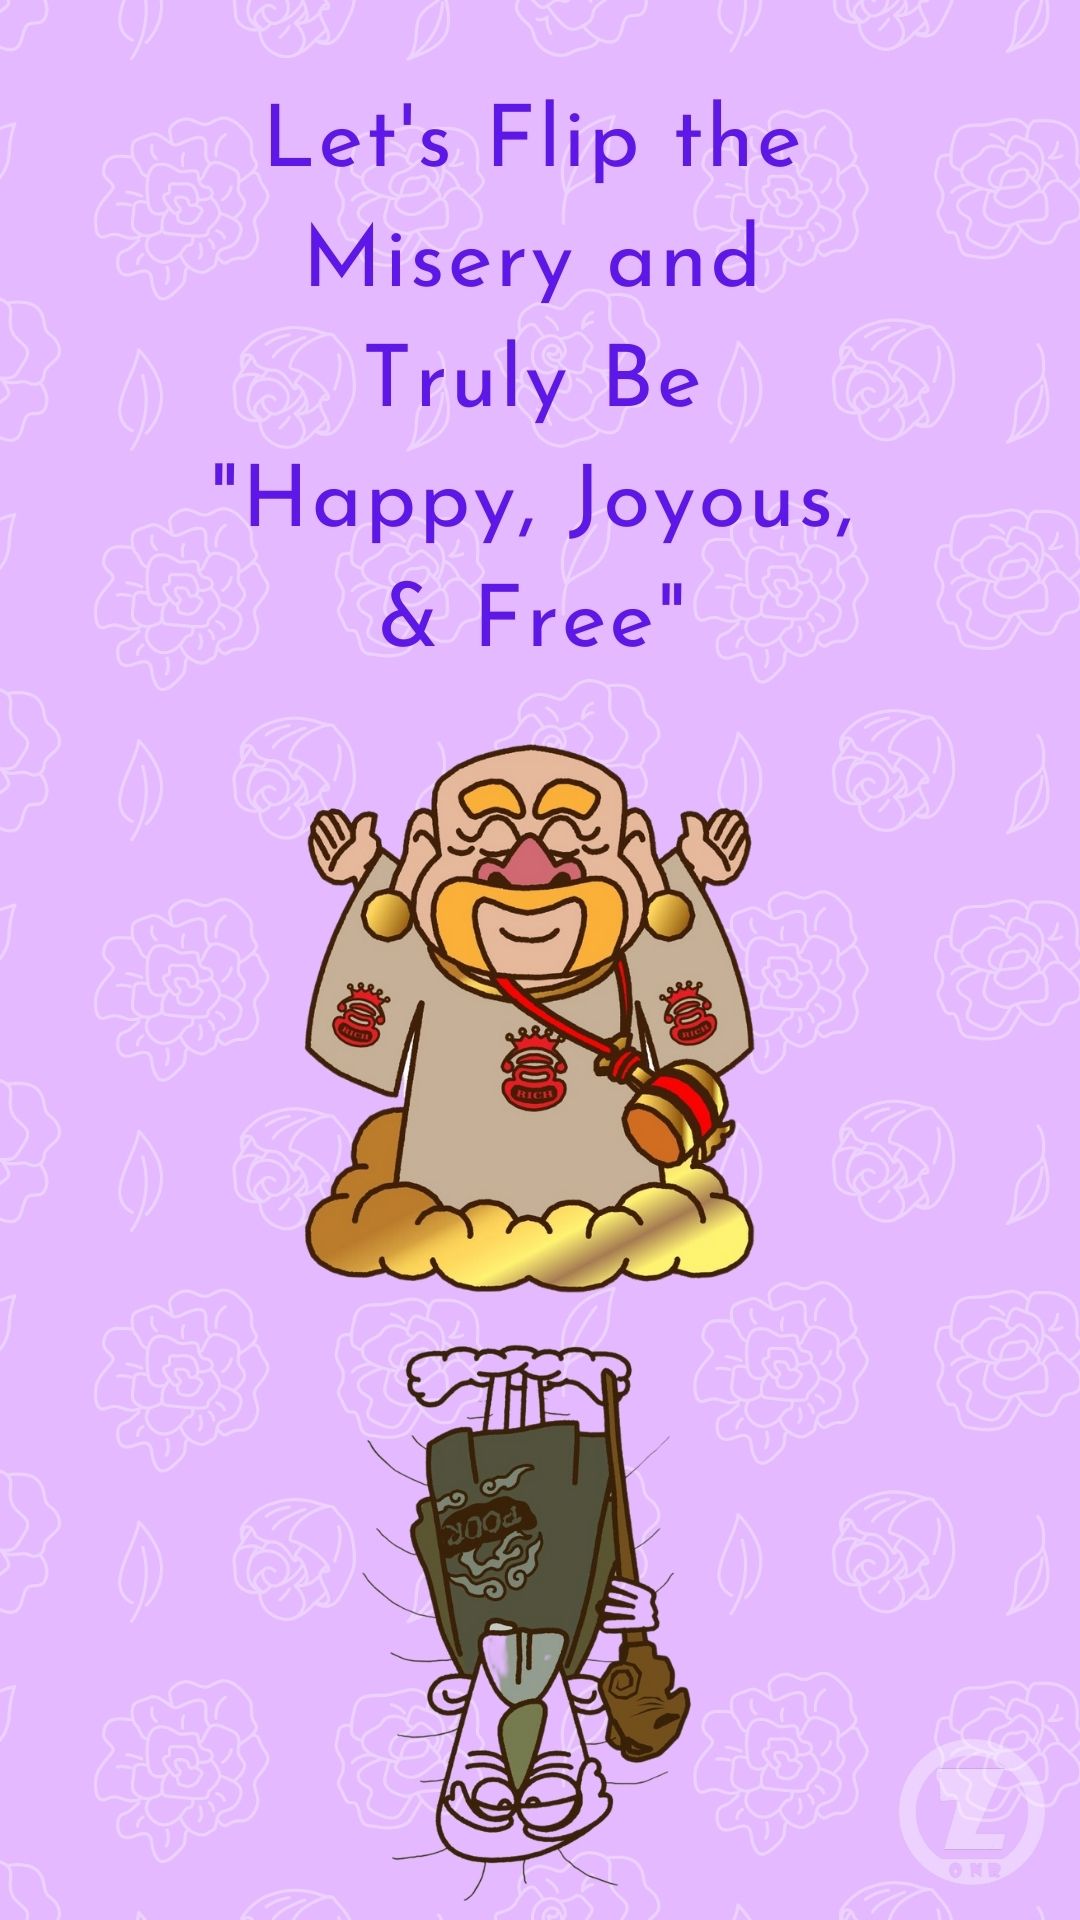 You are currently viewing Let’s Flip the Misery and Truly Be “Happy, Joyous, & Free” – Step 5